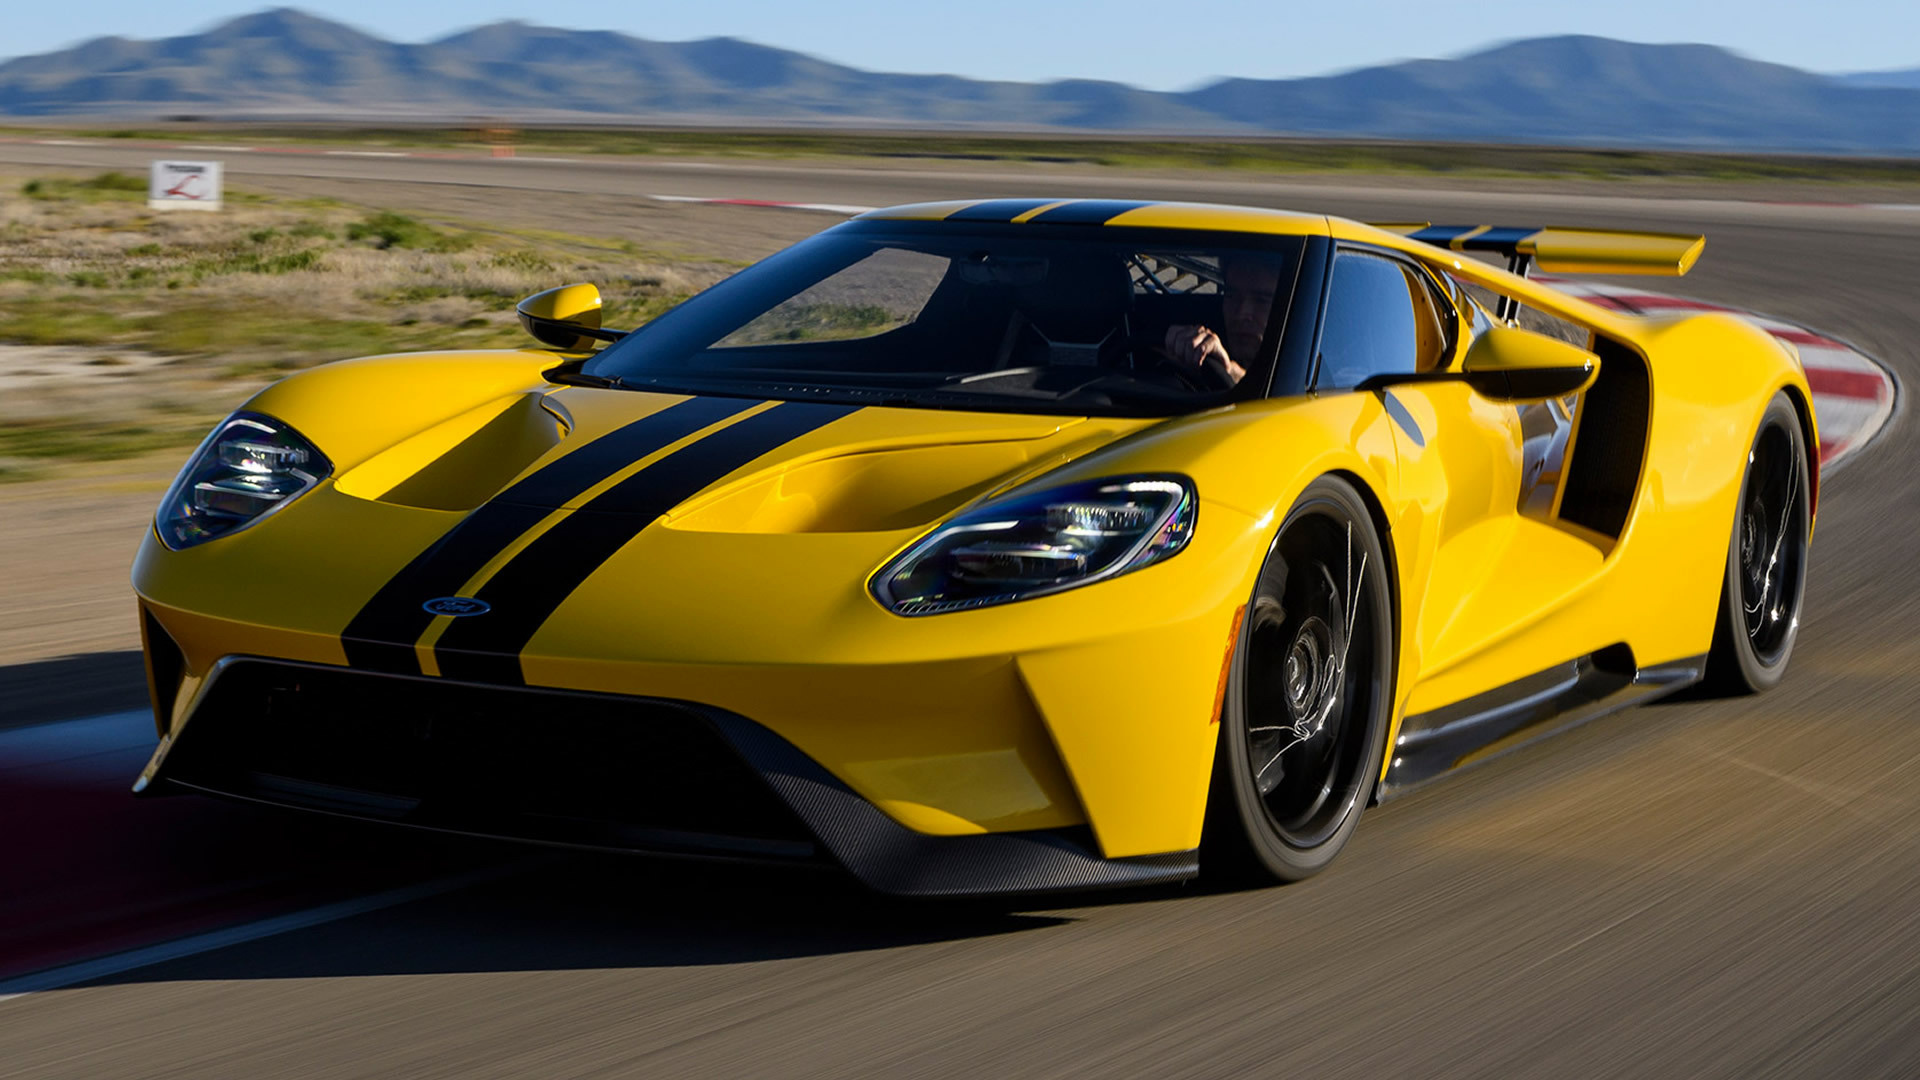 2017 Ford GT - Wallpapers and HD Images | Car Pixel